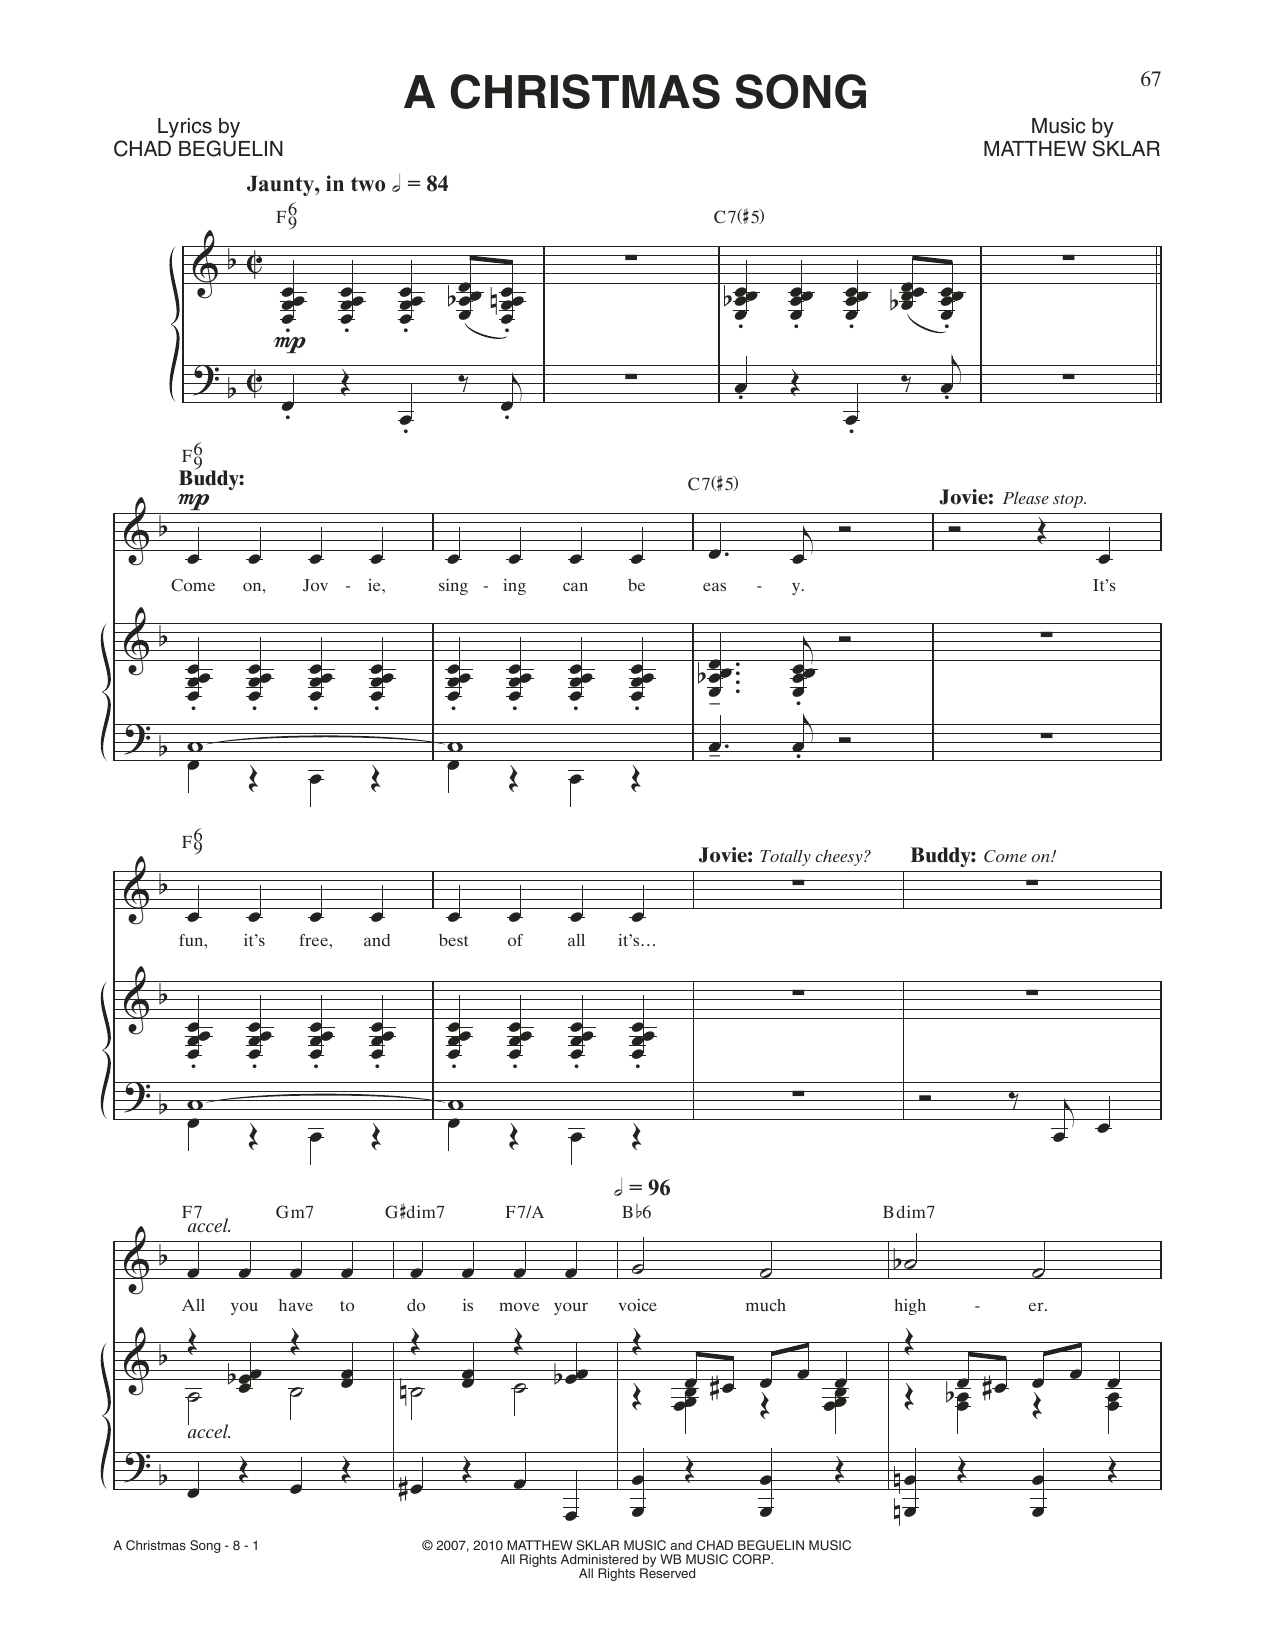 Download Matthew Sklar & Chad Beguelin A Christmas Song (from Elf: The Musical Sheet Music